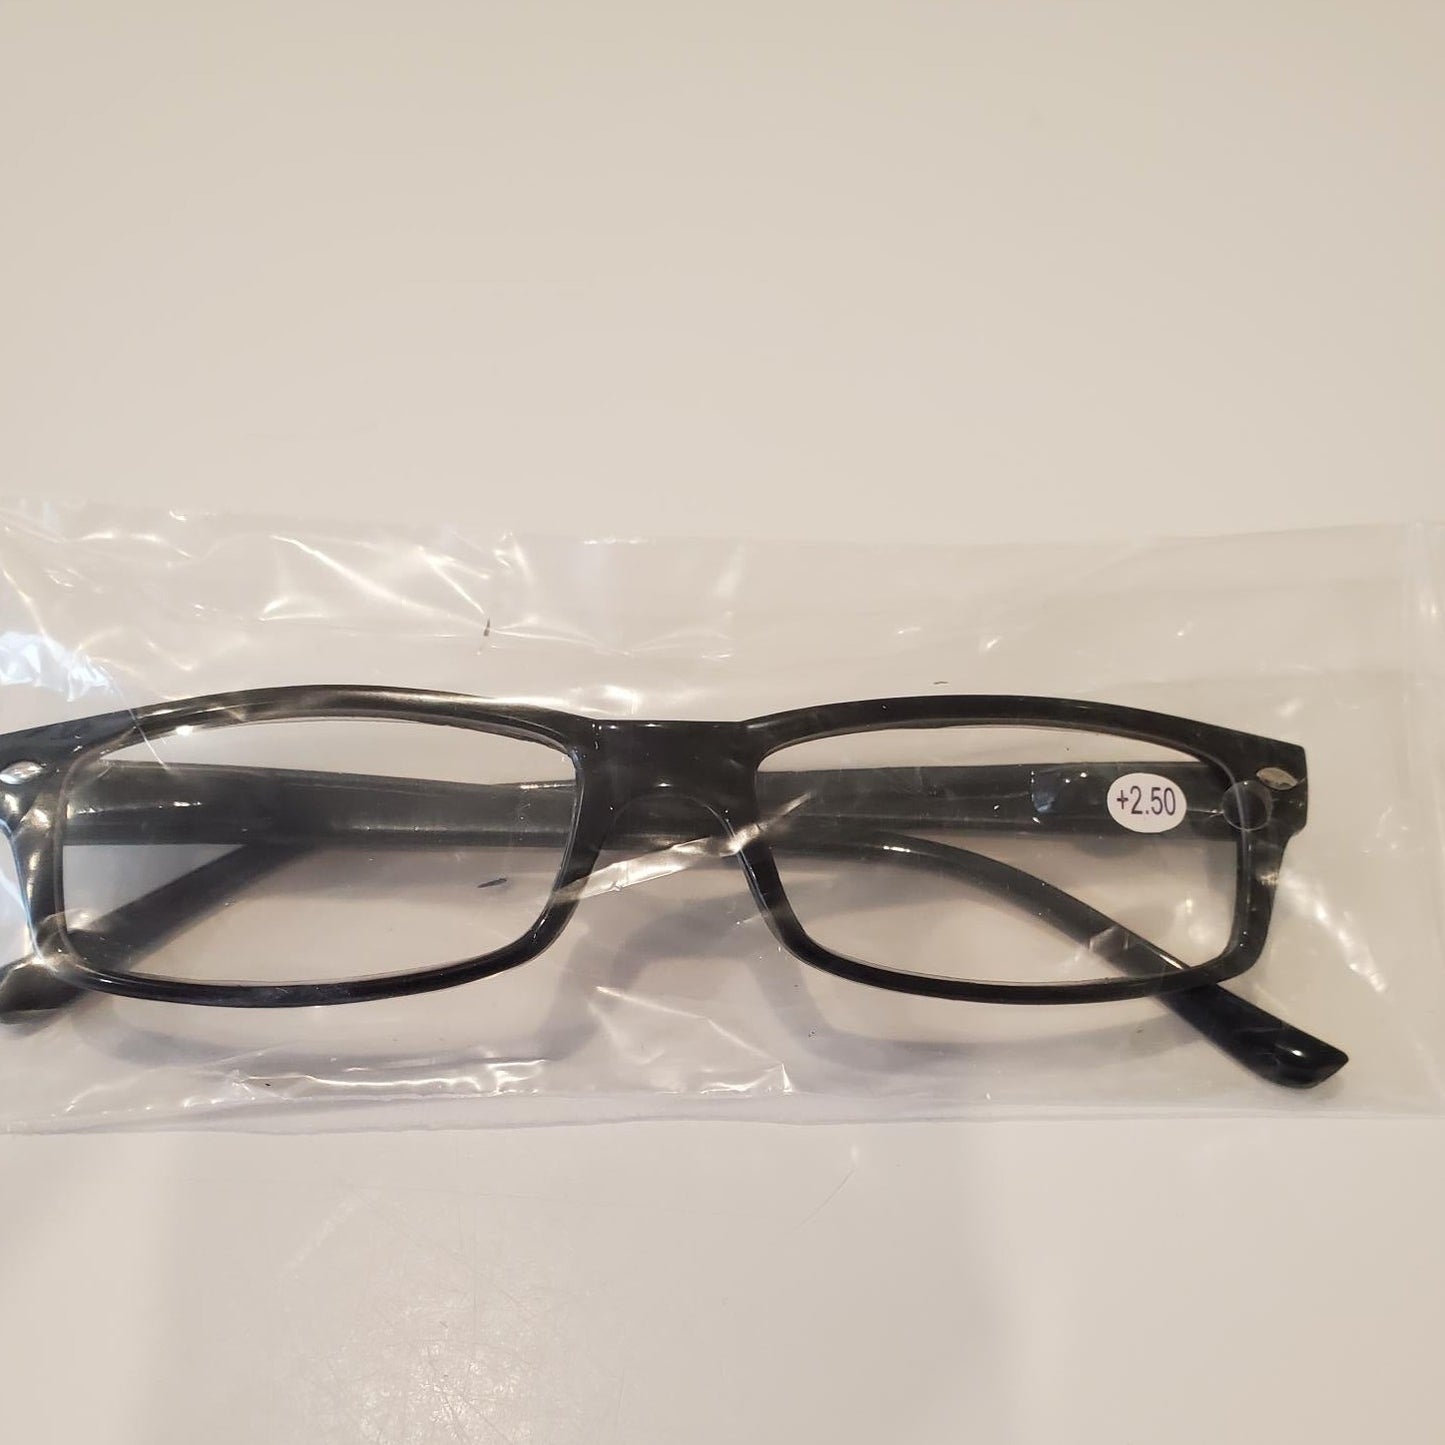 (12) READING glasses  choice of +2..00 + 2.50 + 3.00